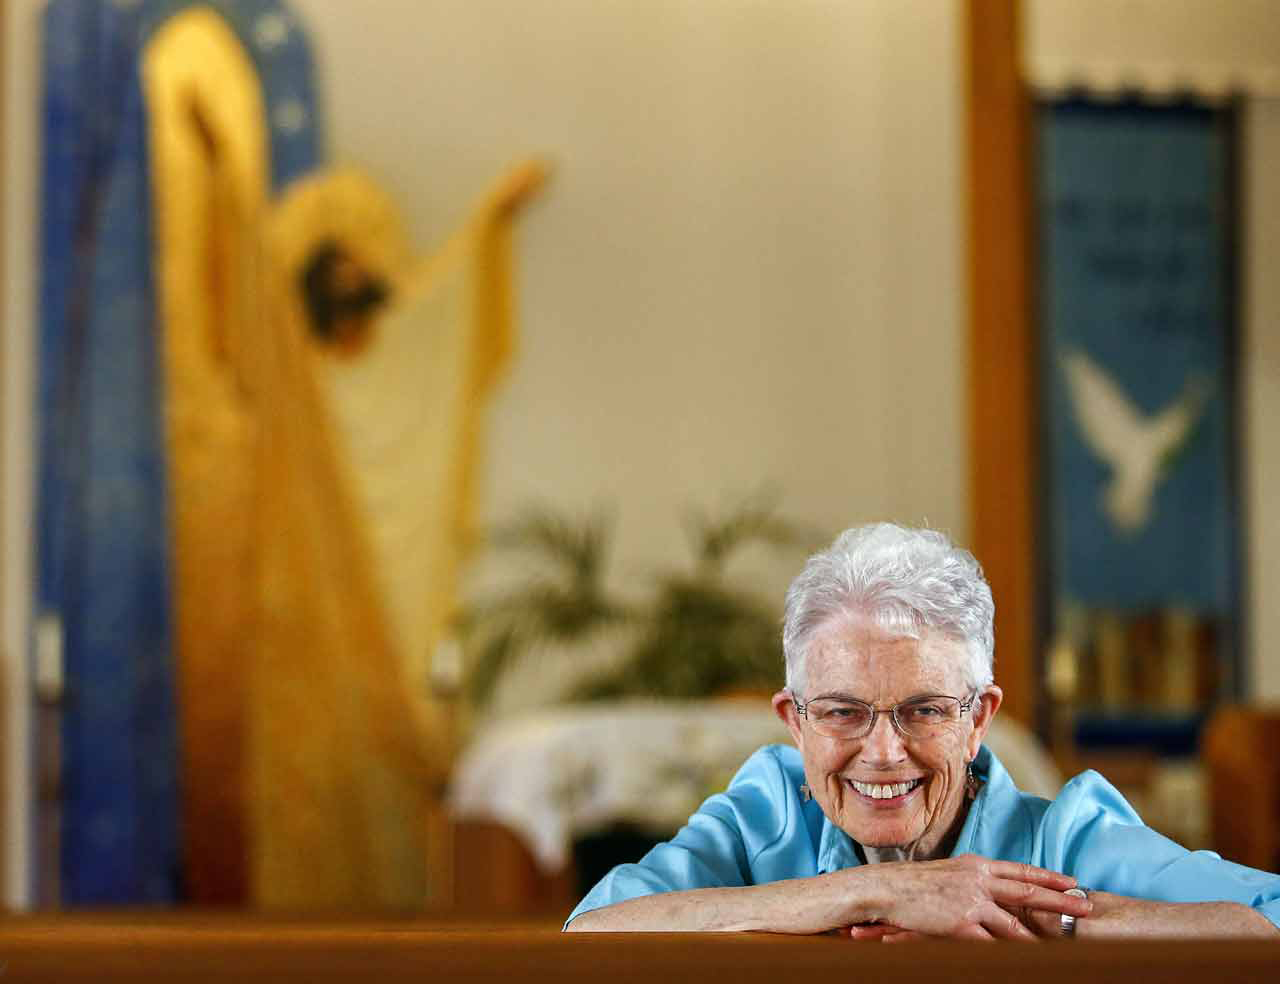 After more than 27 years, Sister Mary Ann Conley is retired from St. Michael’s Catholic Church in Snohomish. The 80-year-old nun departed June 20 to return to her Franciscan order in California. Her ministry in Snohomish was mostly serving home-bound people. (Dan Bates / The Herald)